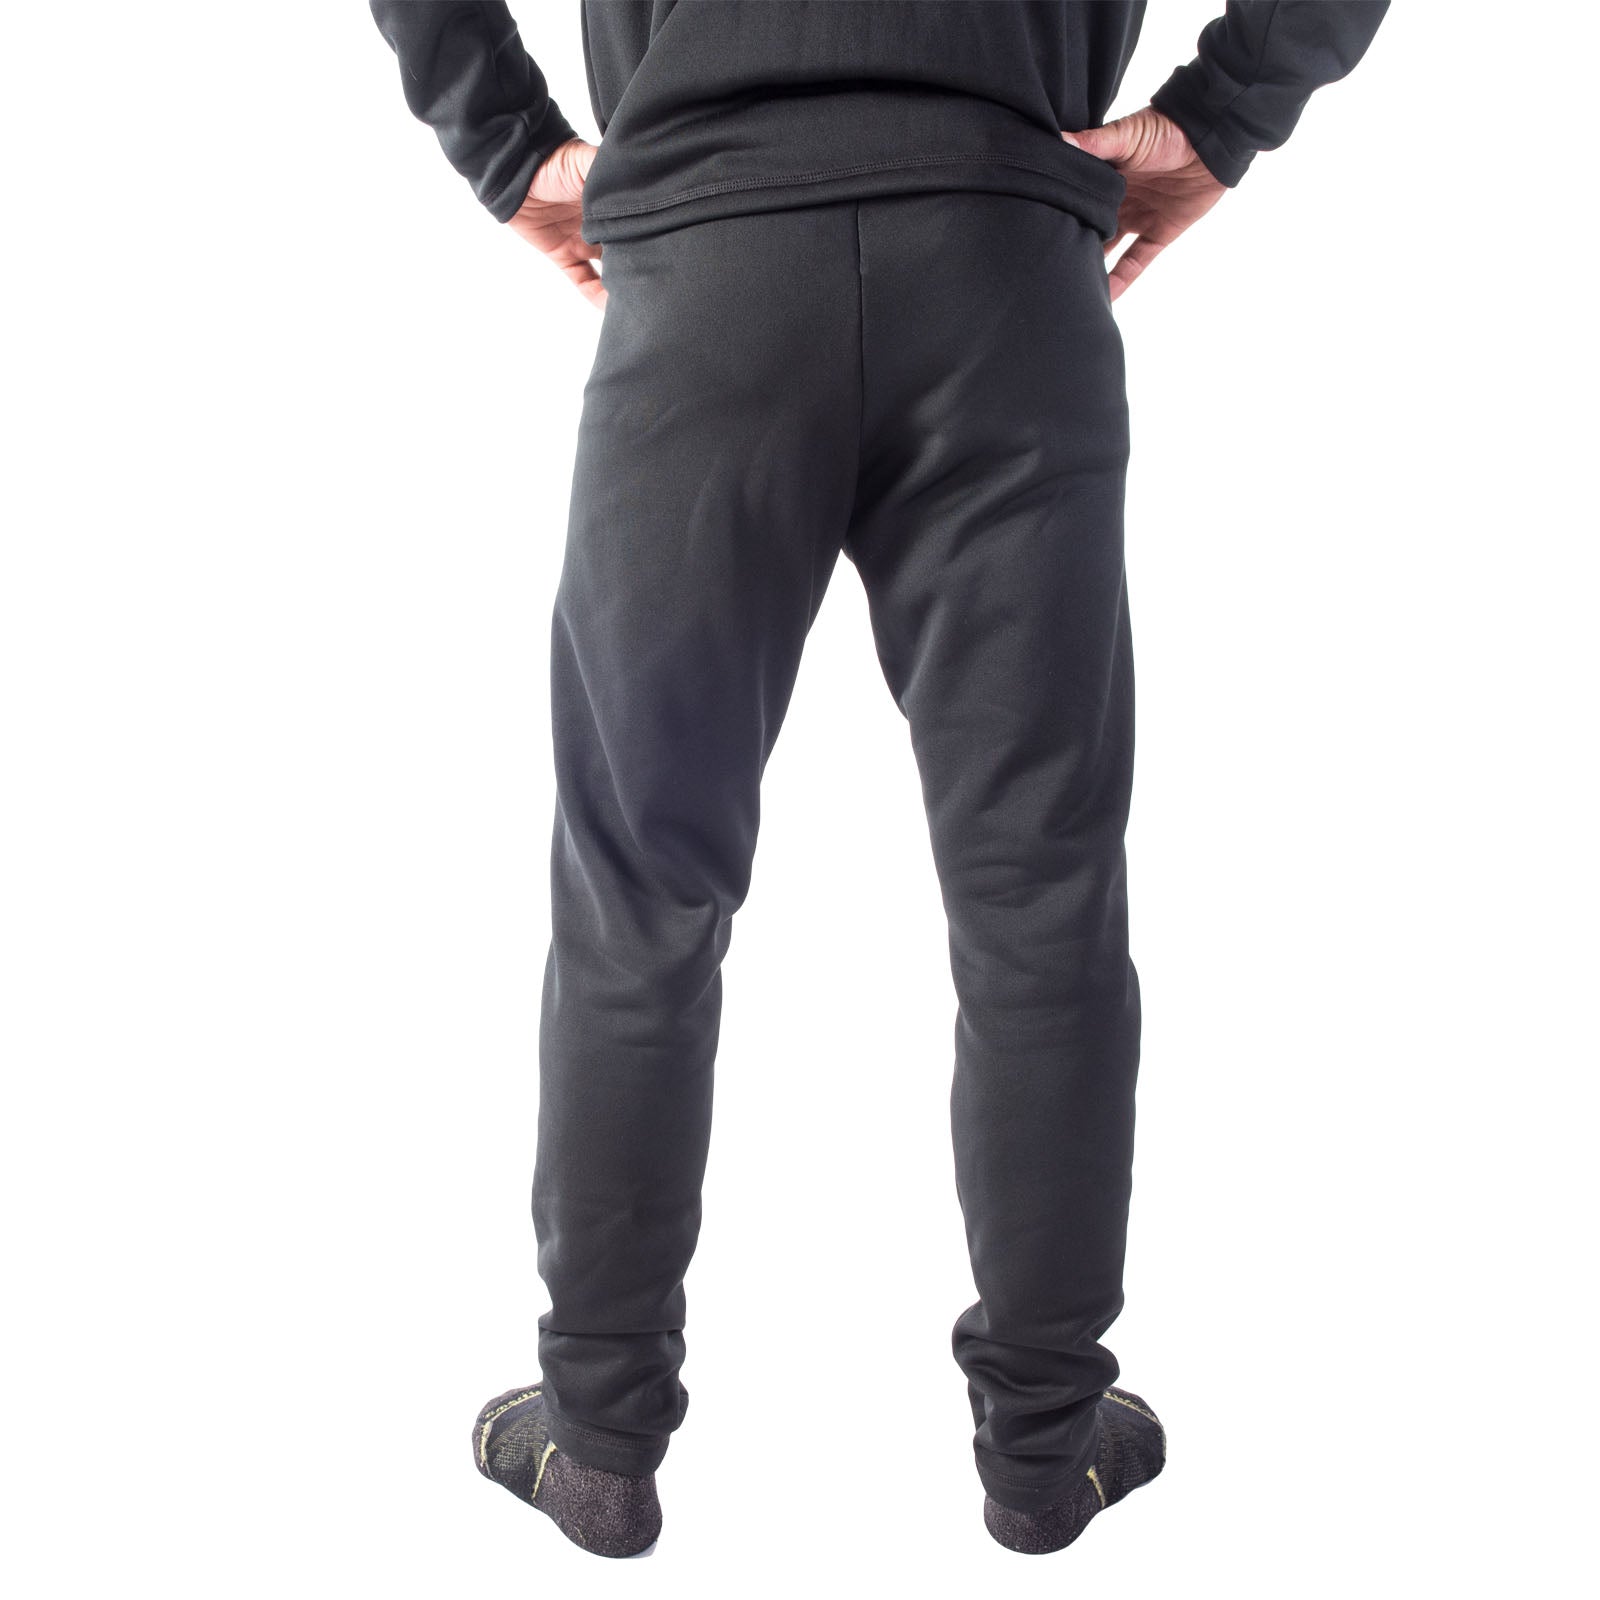 Thermal Long John Pant Five Star Collection - Durkins